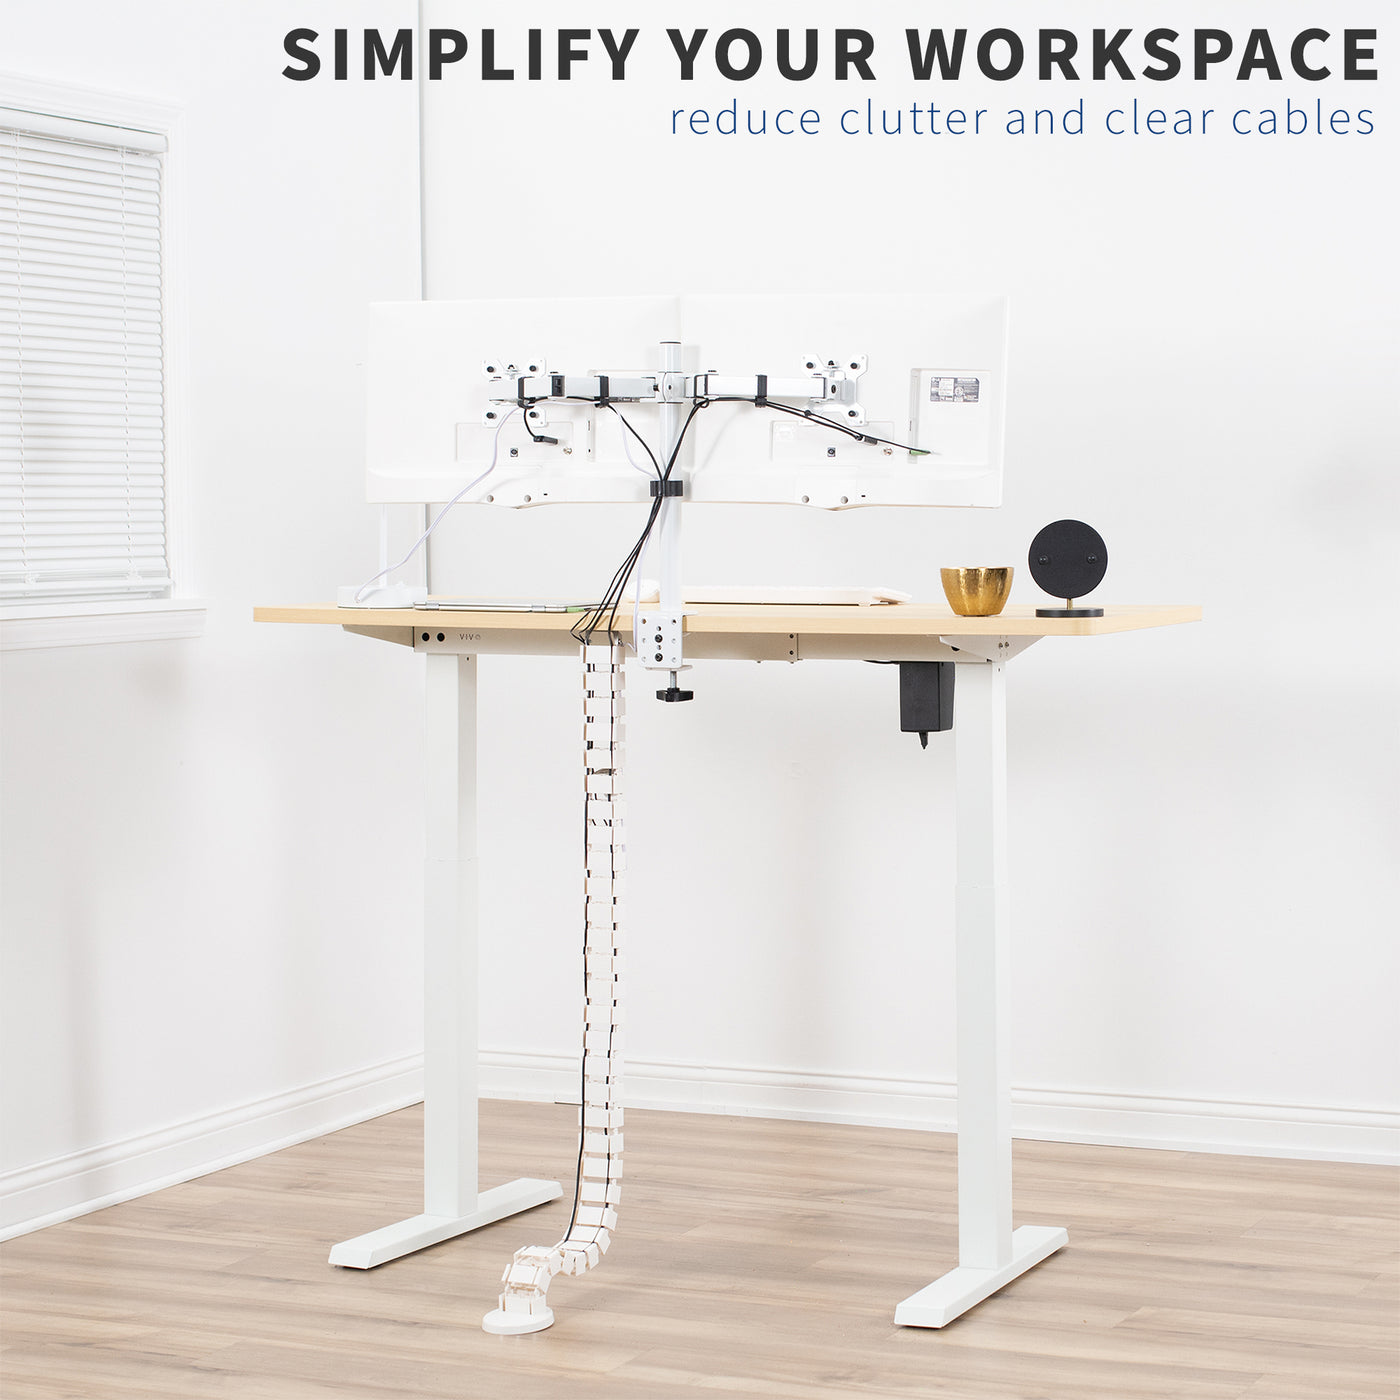 Tidy up your workspace with a cable management strip from VIVO. 